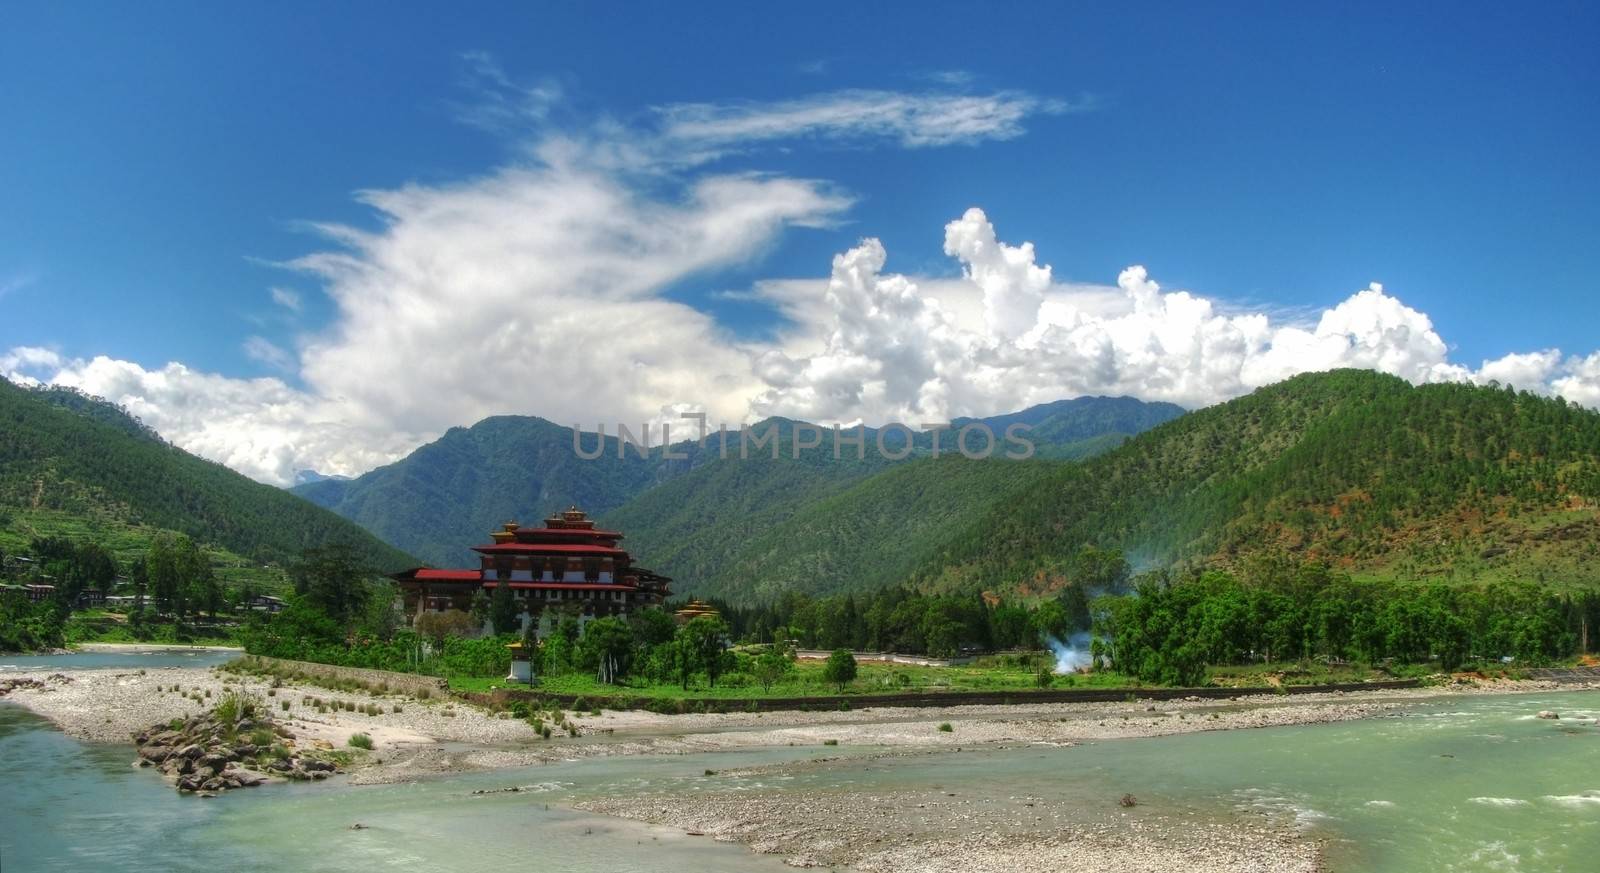 Punakha Dzong, the old capital of Bhutan by homocosmicos